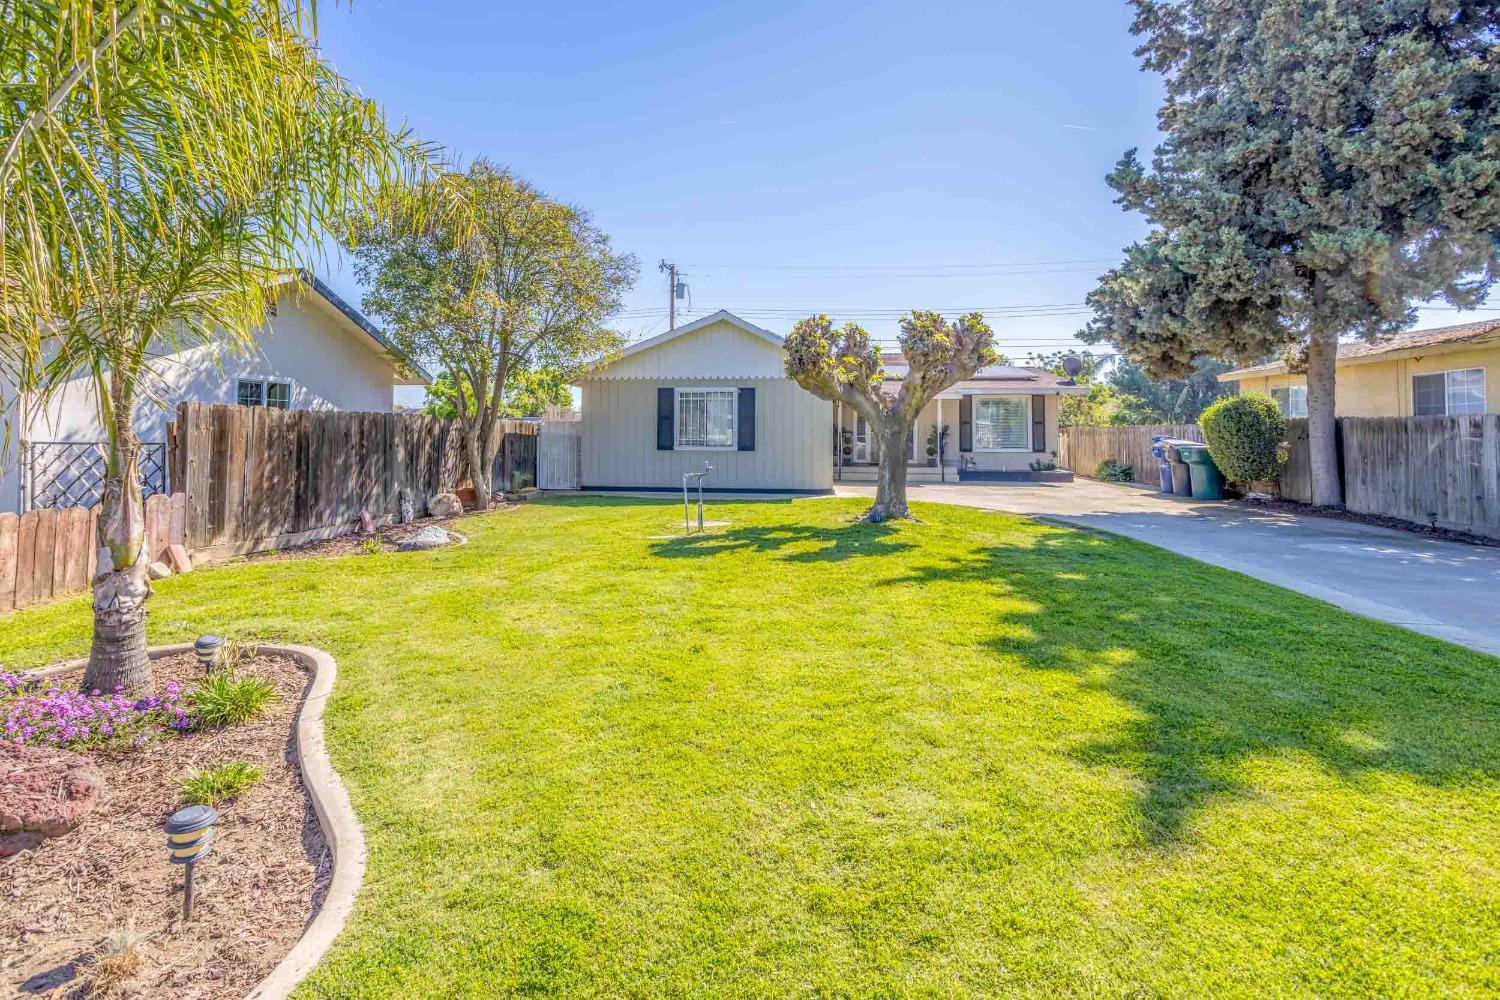 Photo of 334 N California St in Tulare, CA